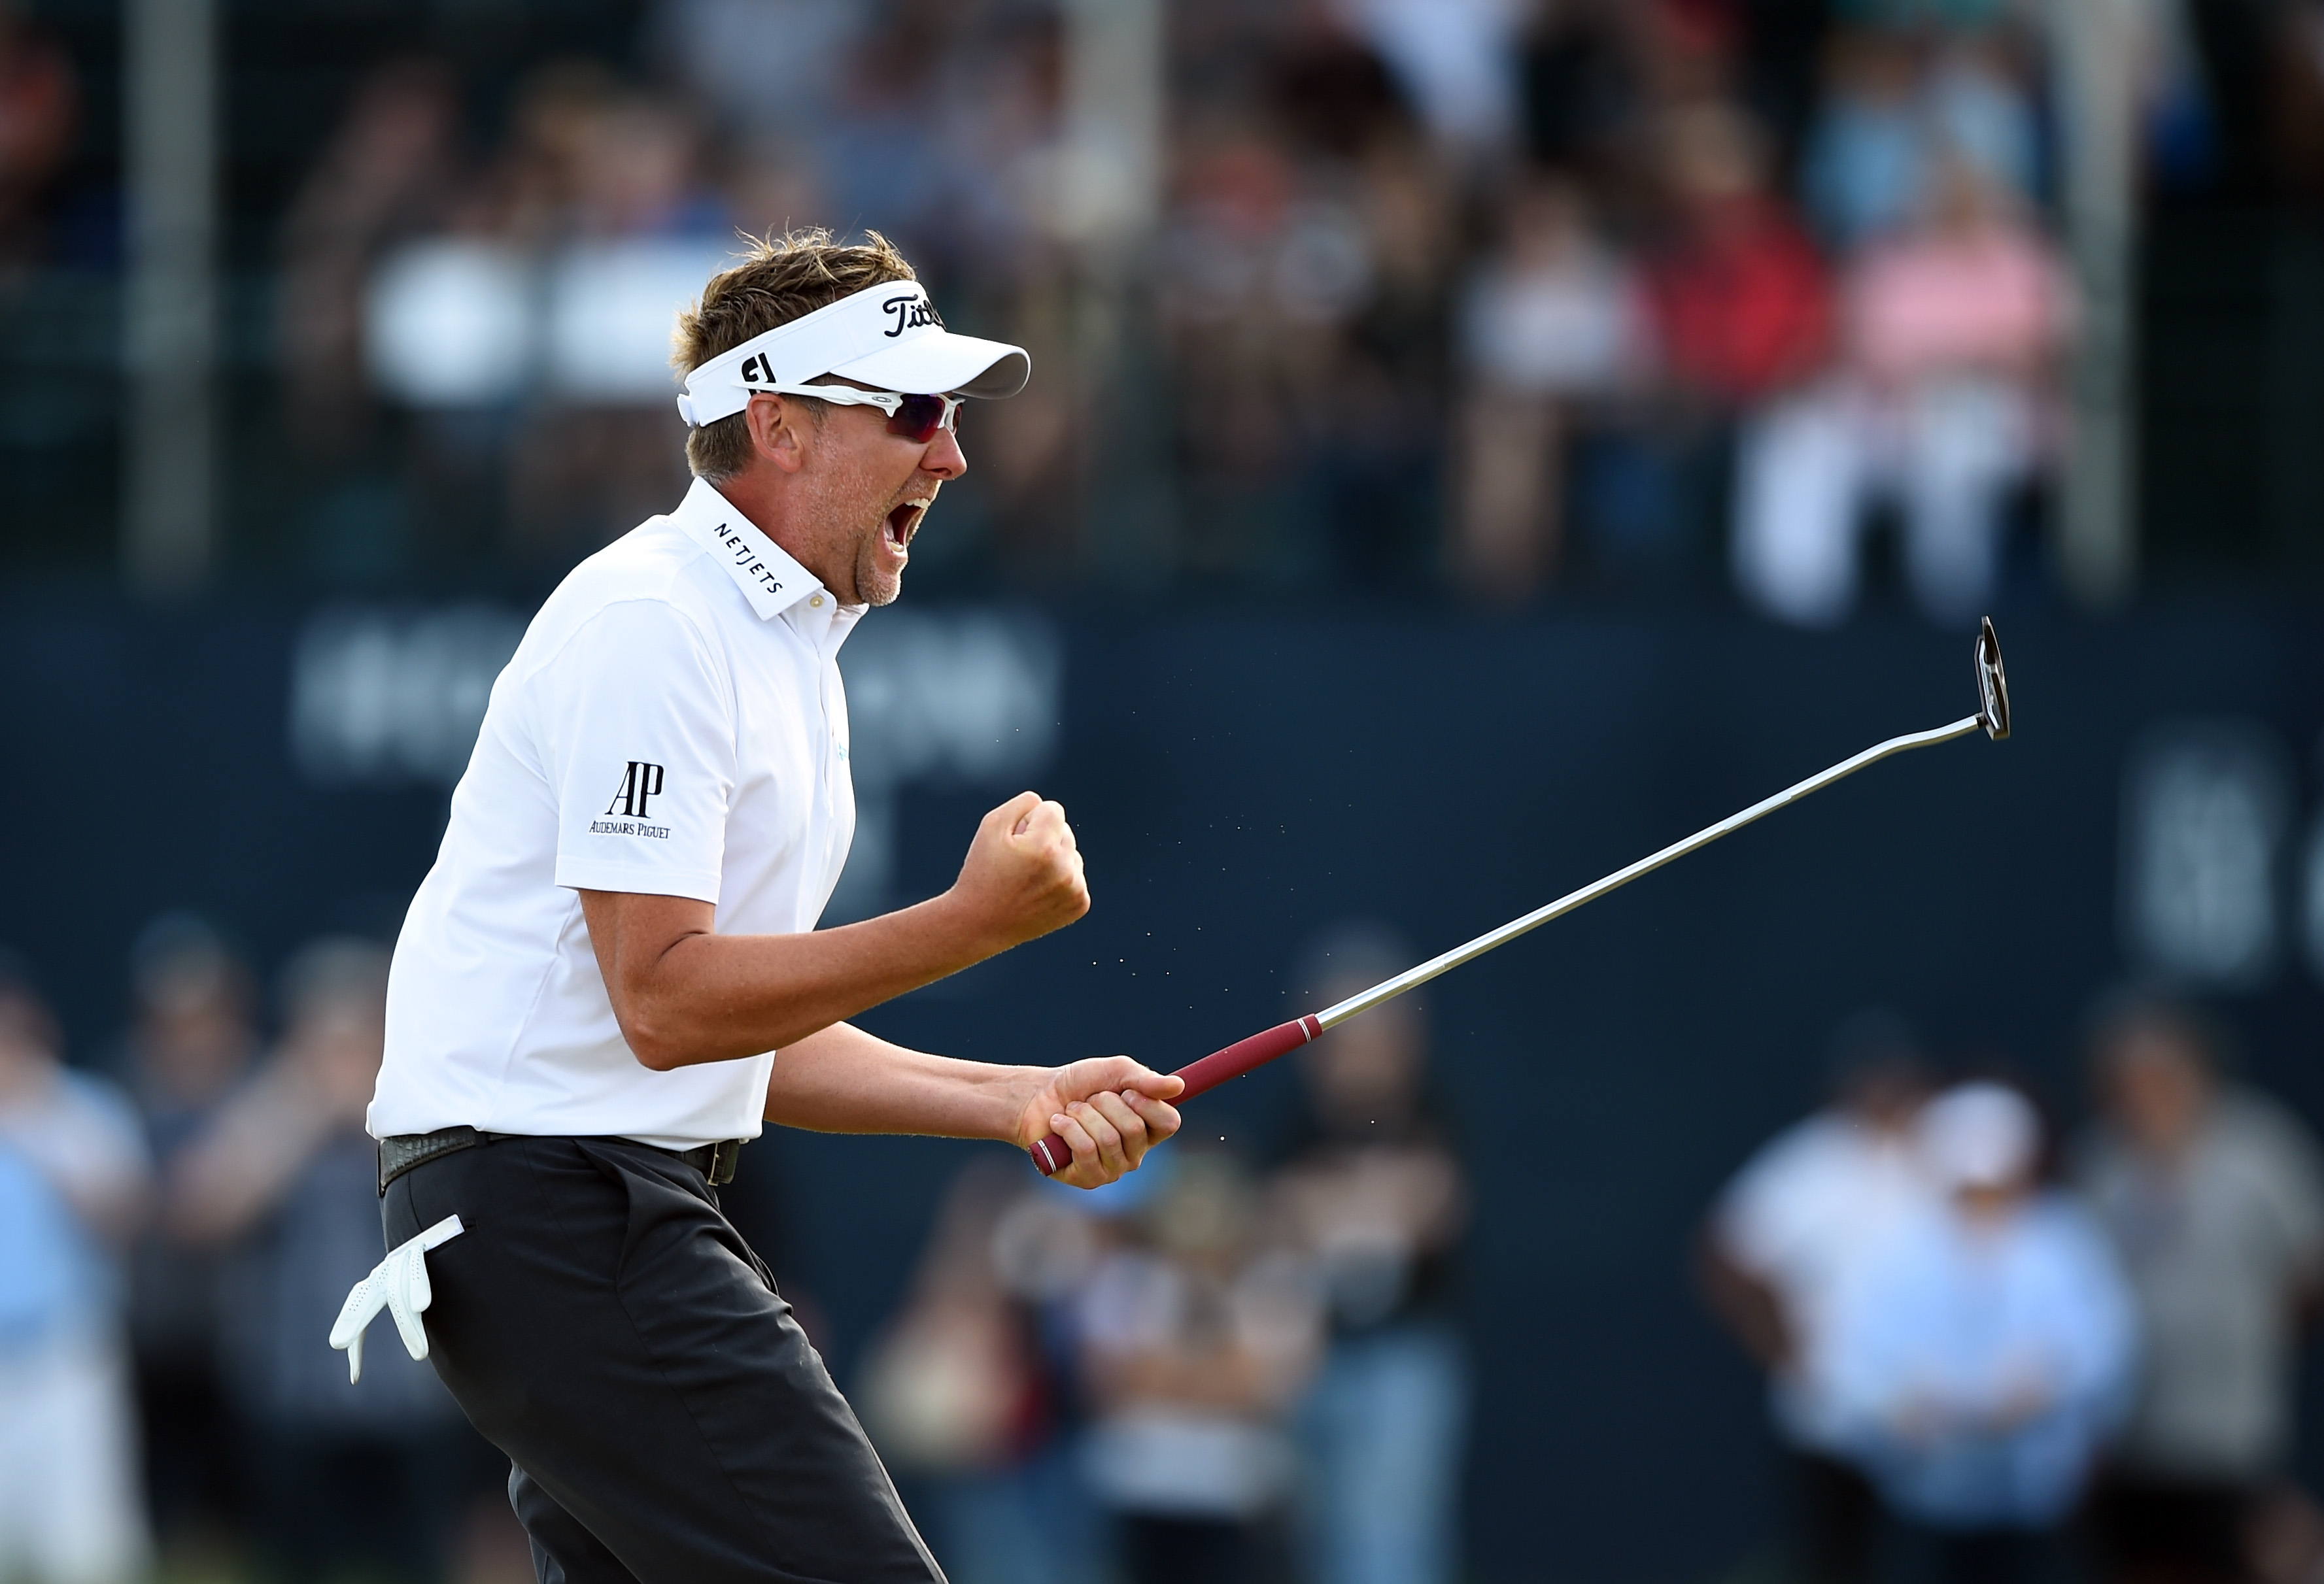 Ian Poulter: I feel ready to finally play well at Wentworth